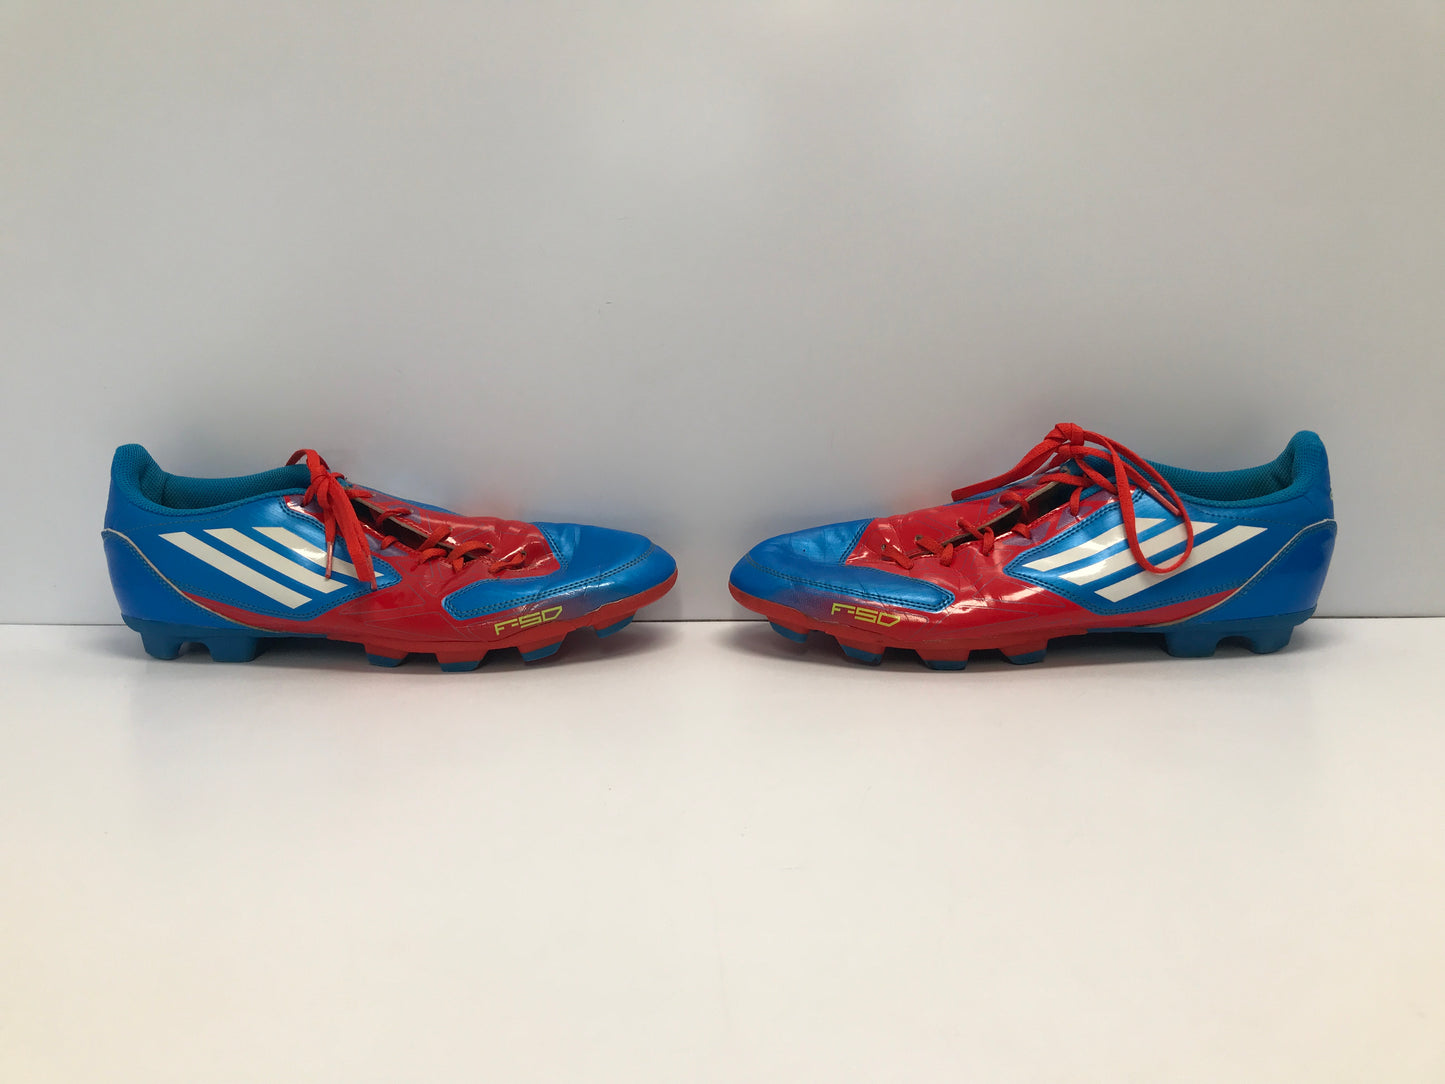 Soccer Shoes Cleats Men's Size 11.5 Adidas Blue Red